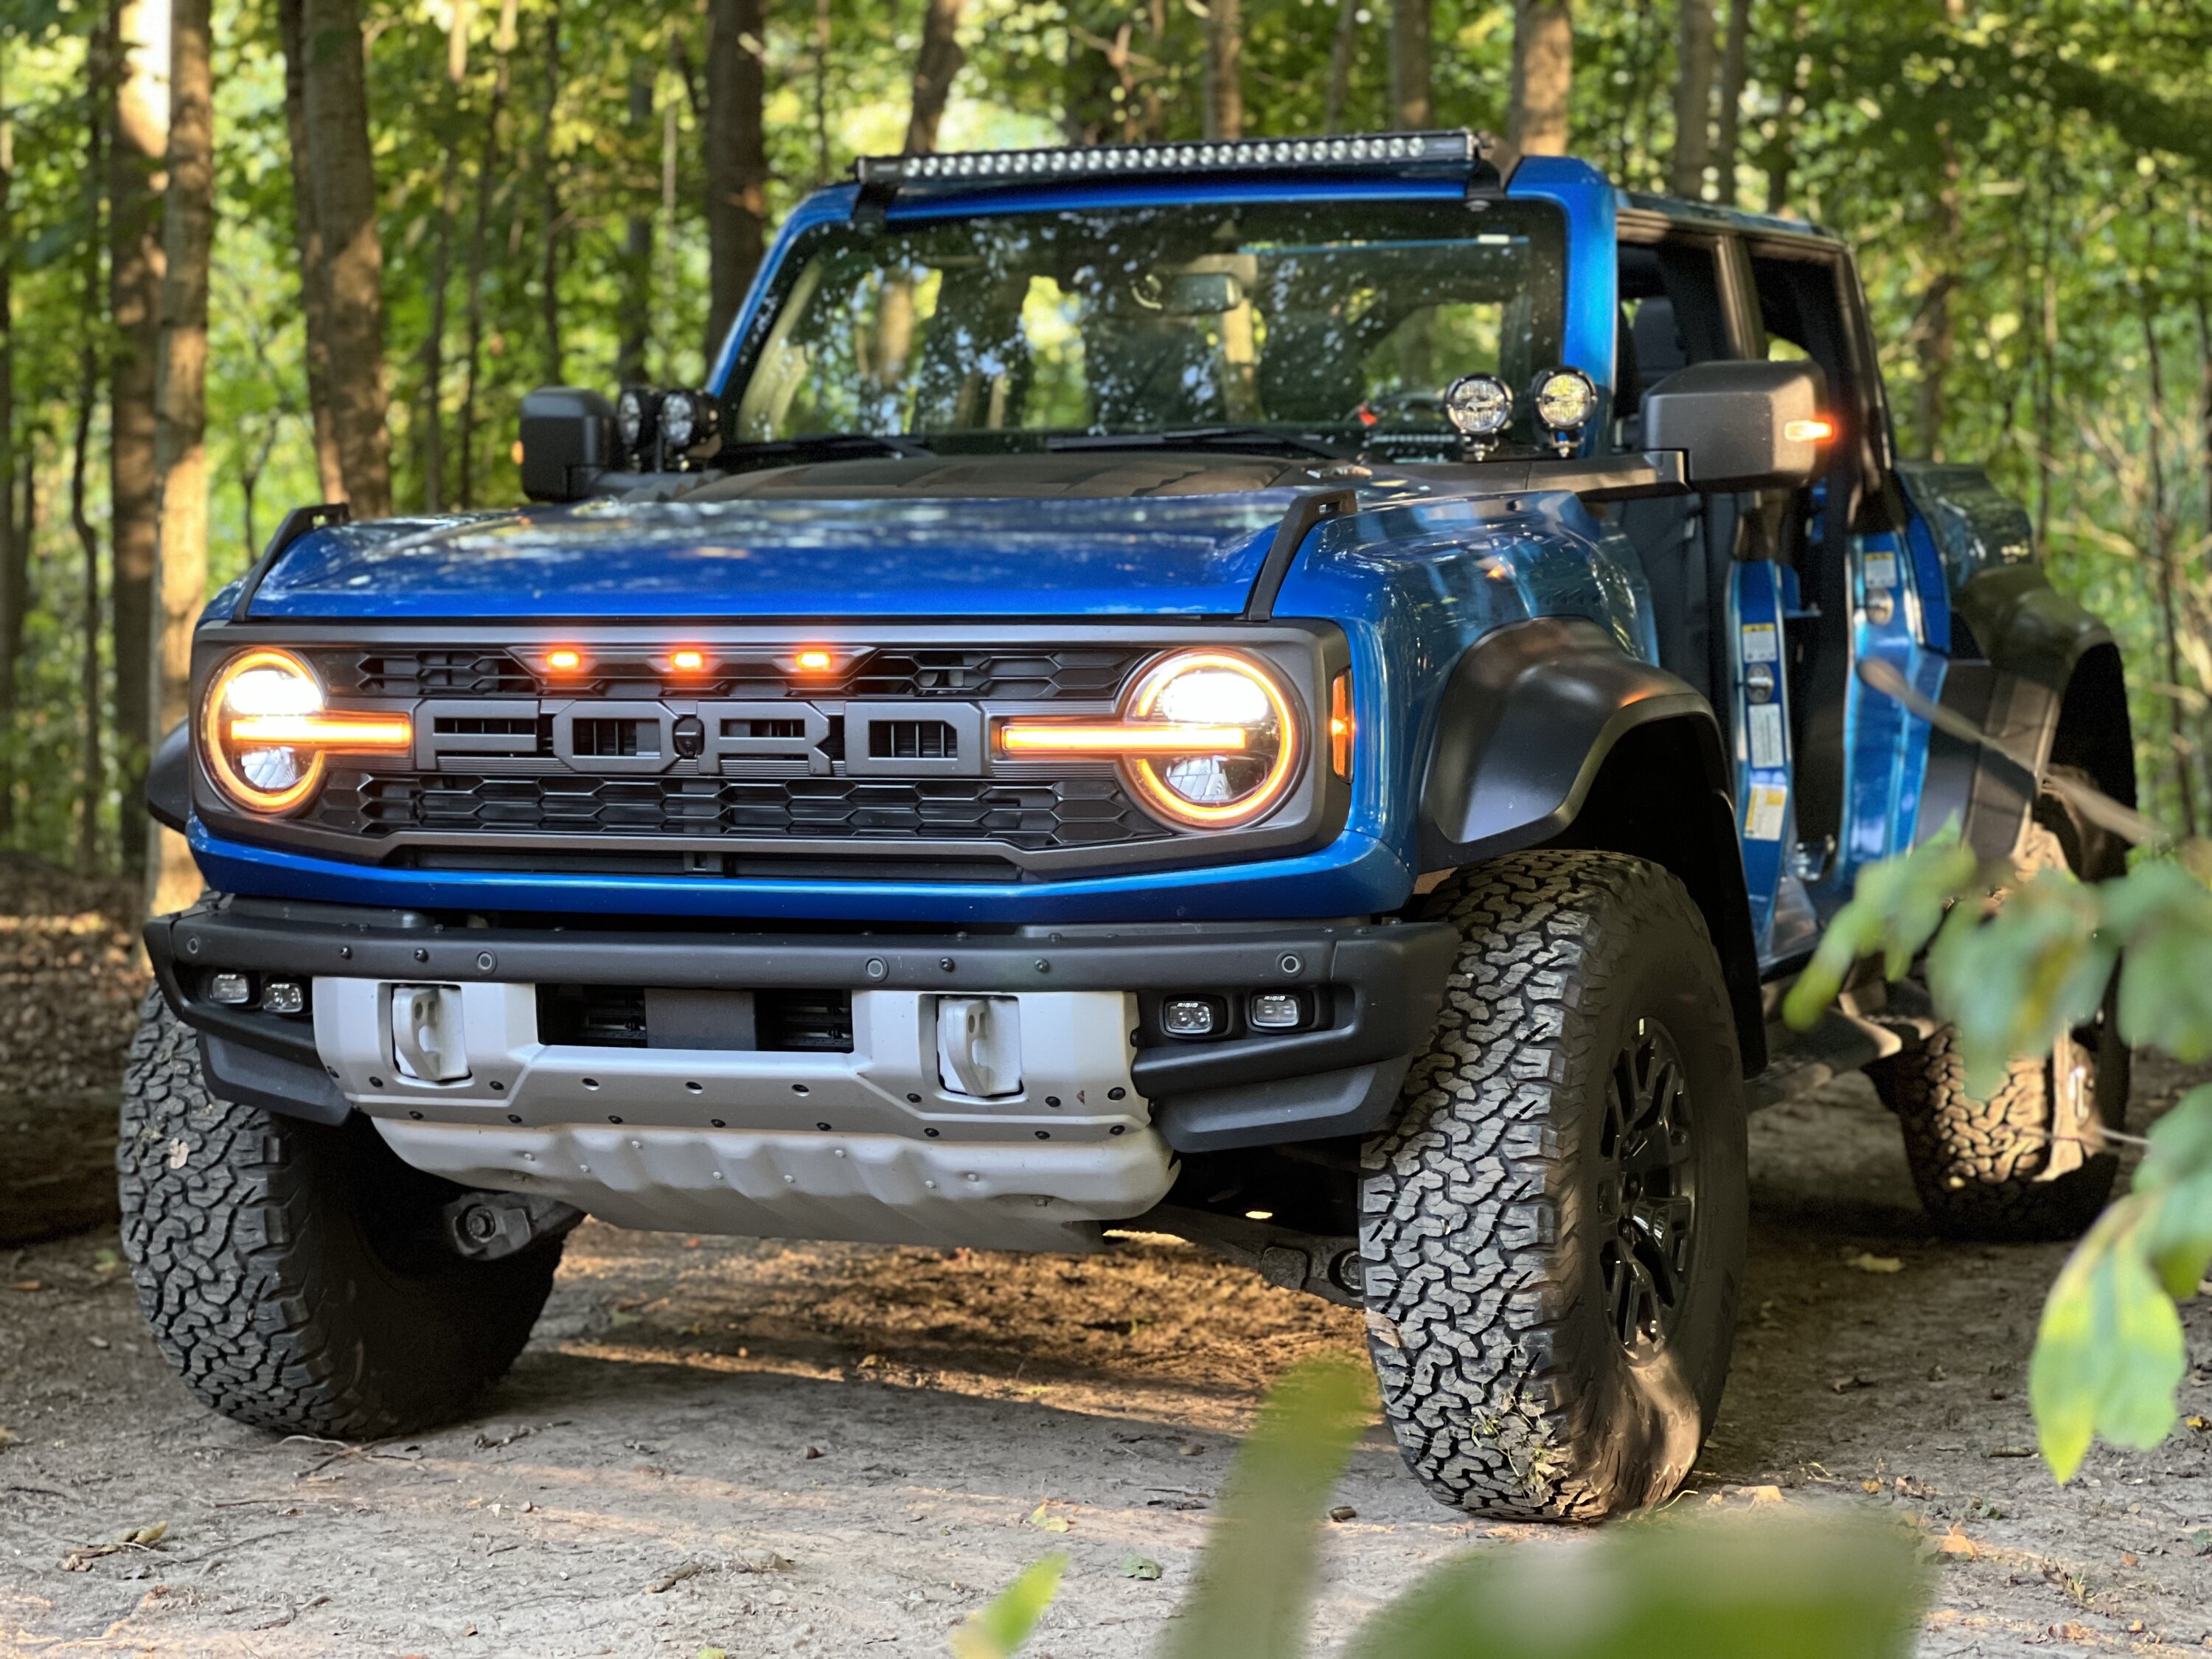 Ford Bronco TopLift Pros OCTOBER GIVEAWAY - WIN A $1,000 TOPLIFT PROS GIFT CARD IMG_1156